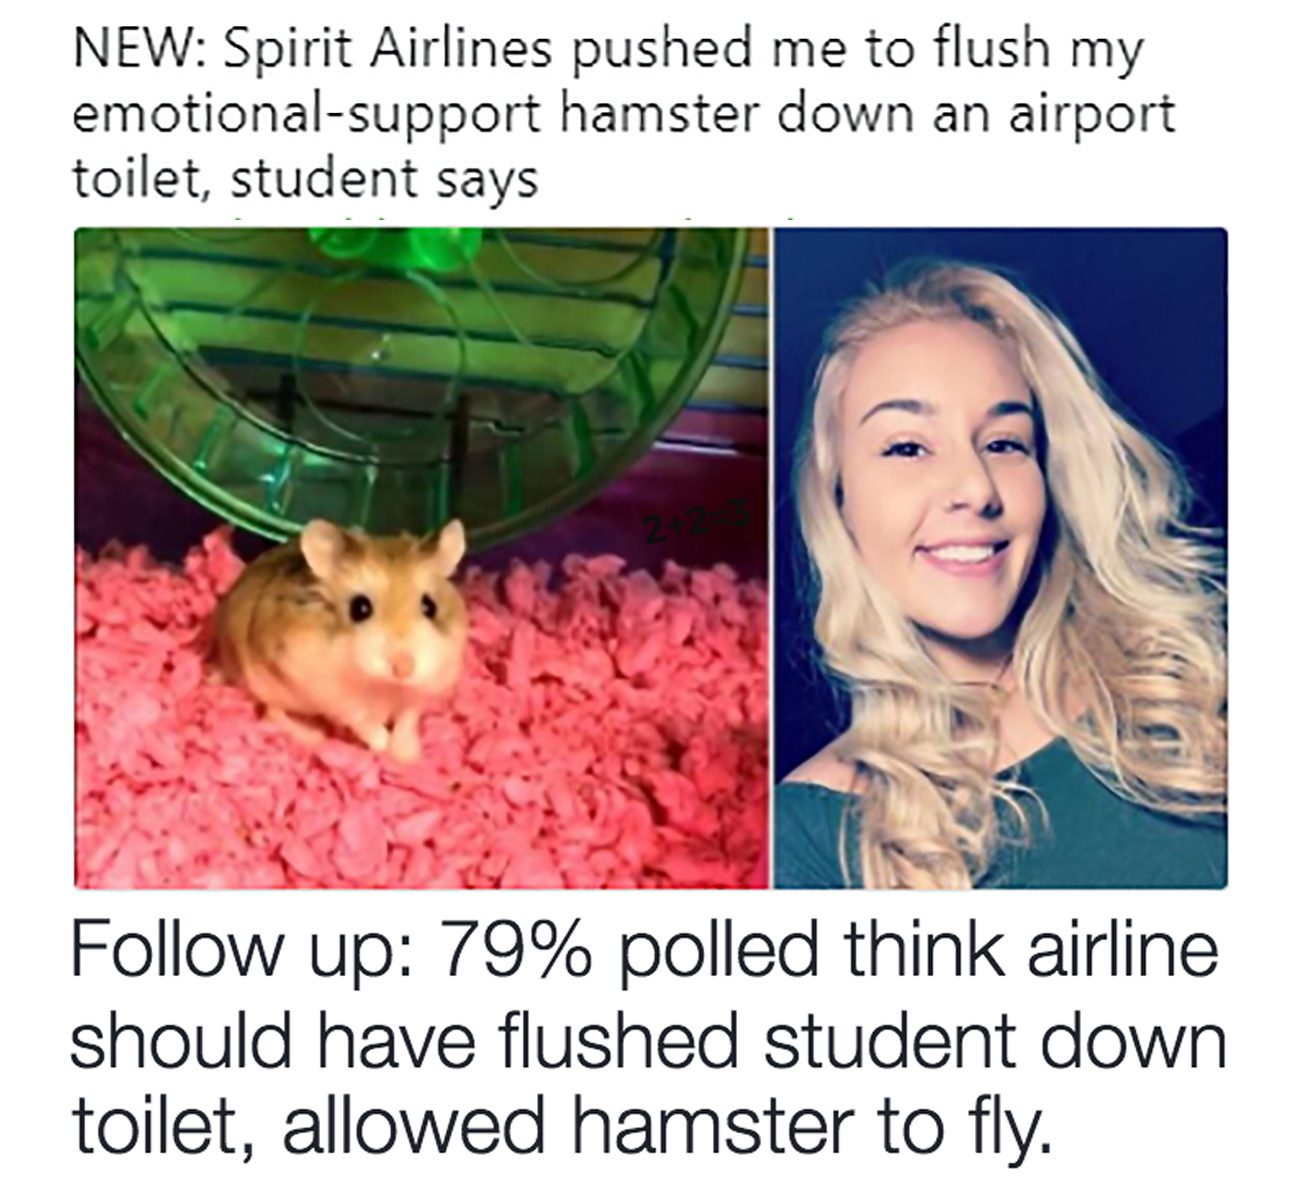 pebbles the hamster meme - New Spirit Airlines pushed me to flush my emotionalsupport hamster down an airport toilet, student says 2 up 79% polled think airline should have flushed student down toilet, allowed hamster to fly.